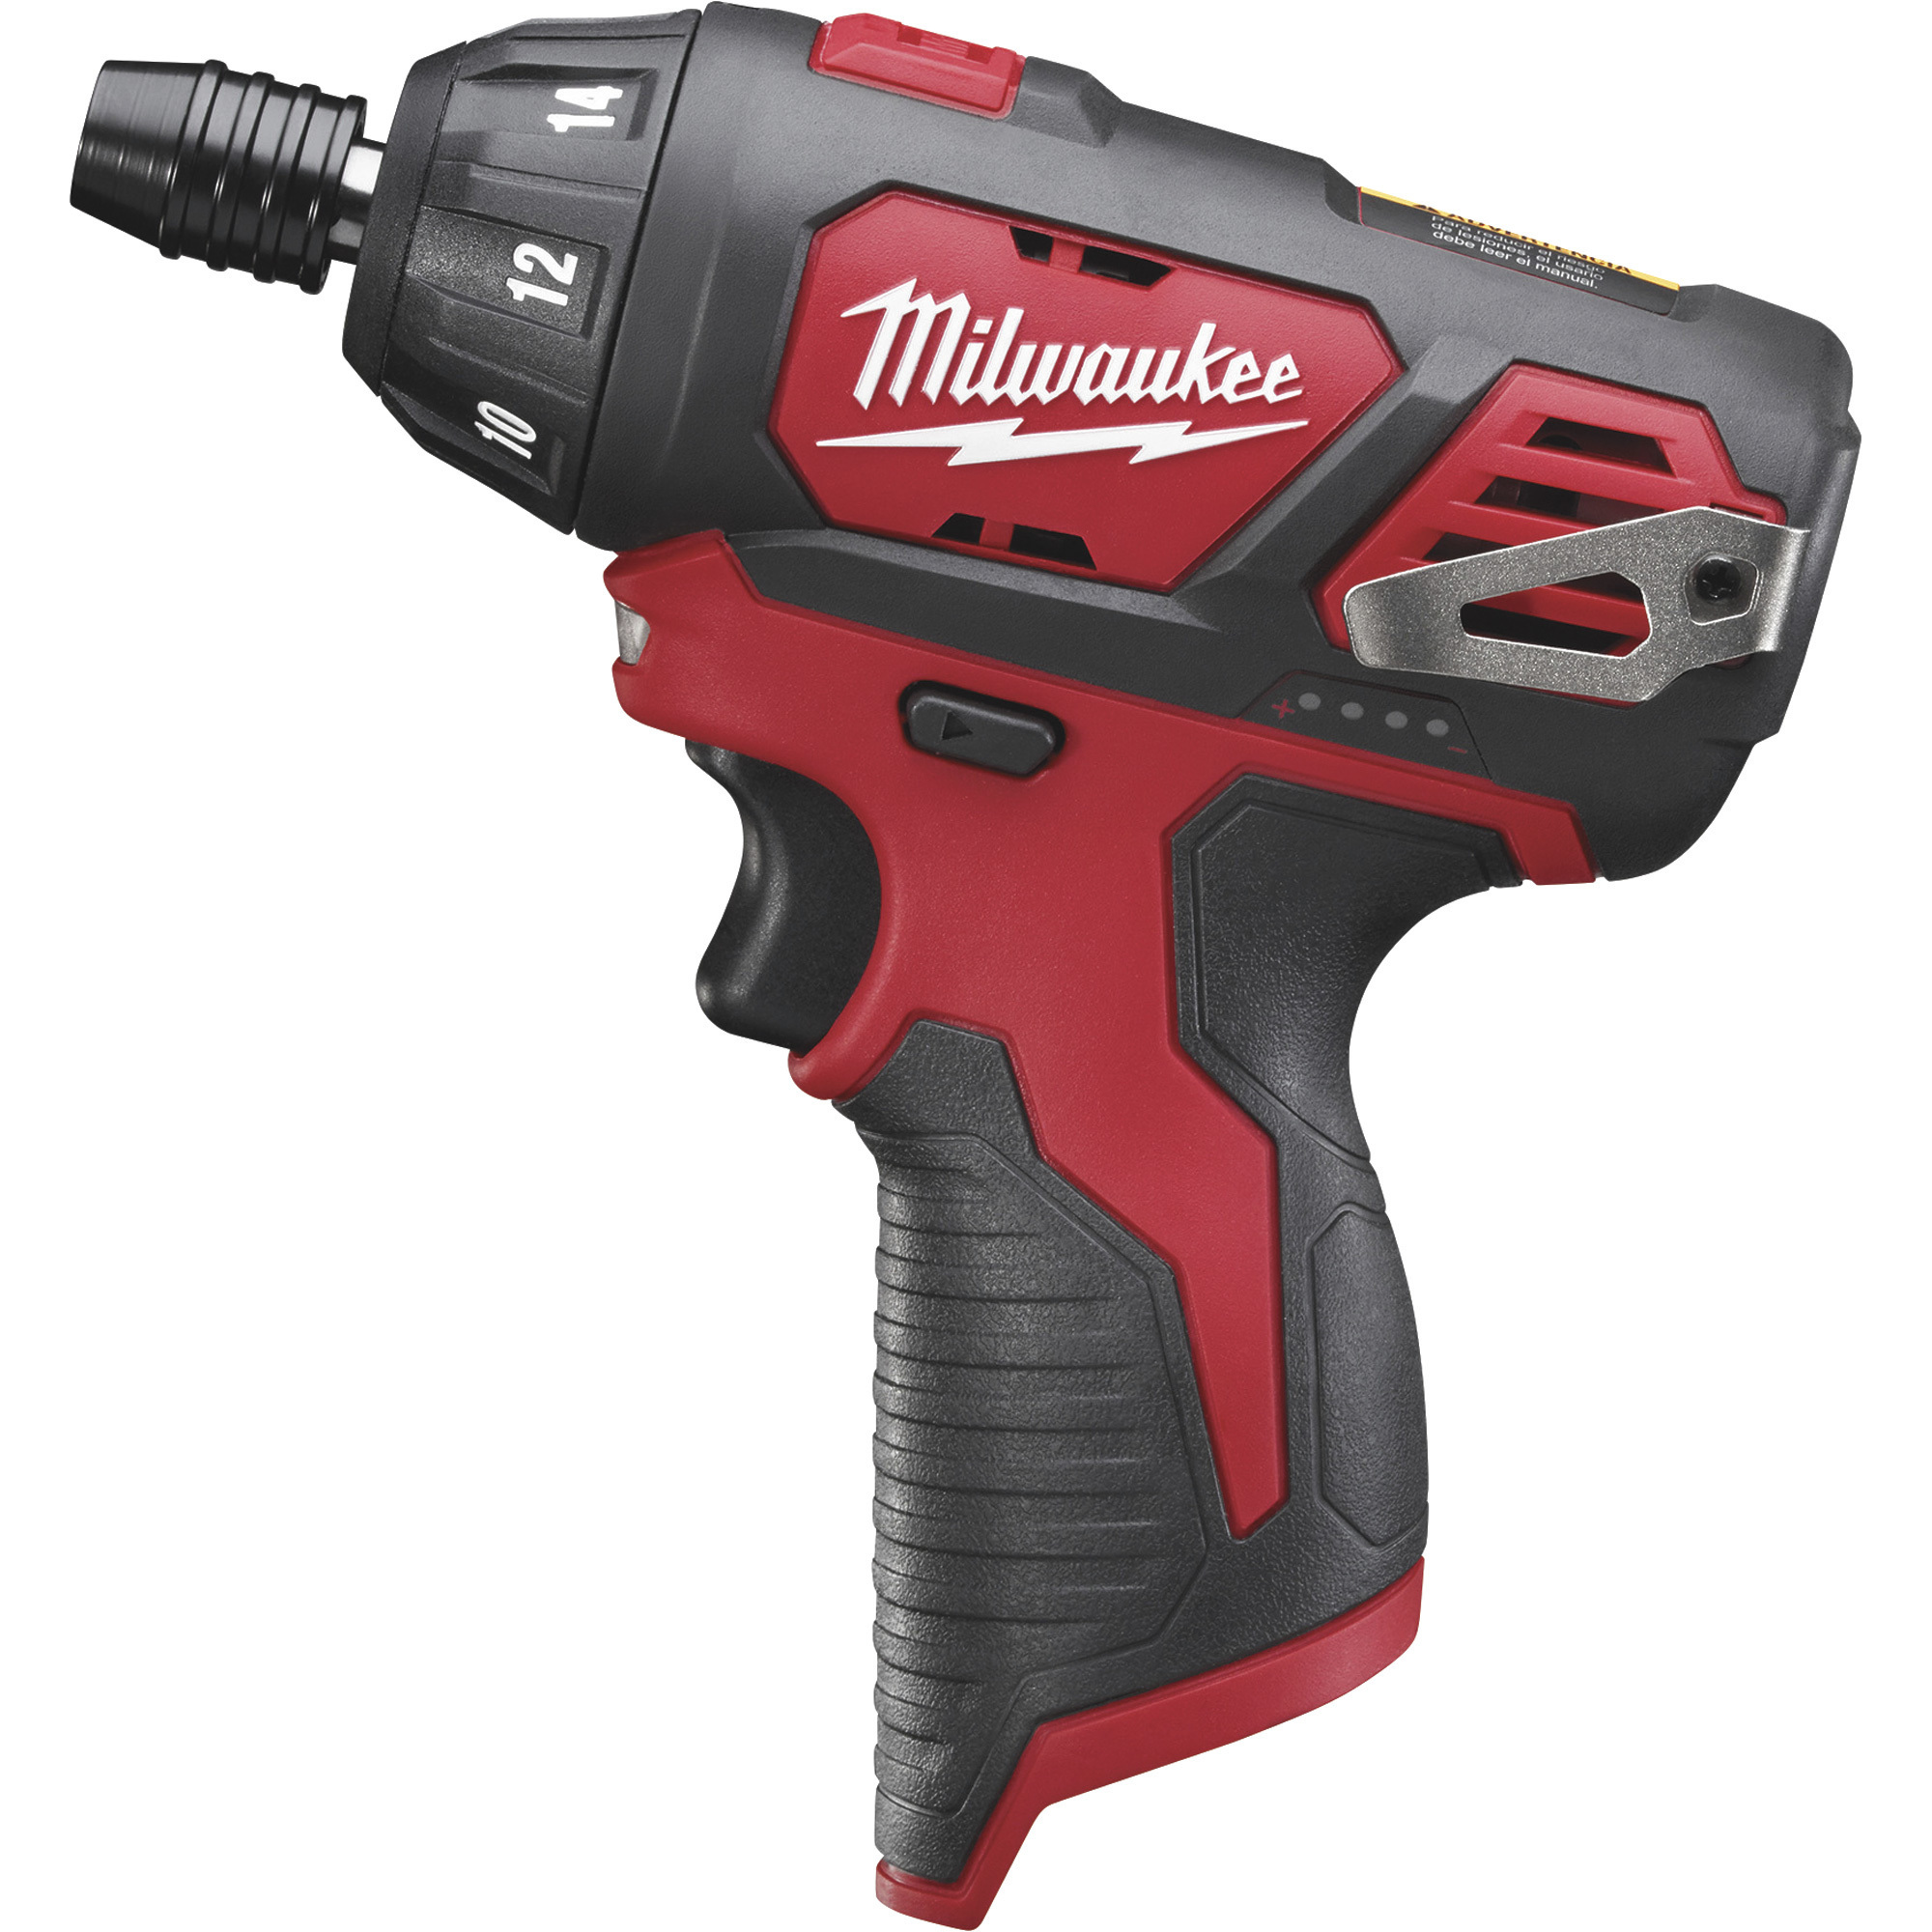 Milwaukee M12 Lithium-Ion Cordless Electric Subcompact Screwdriver, Tool Only, 1/4Inch Hex Chuck, 500 RPM, Model 2401-20